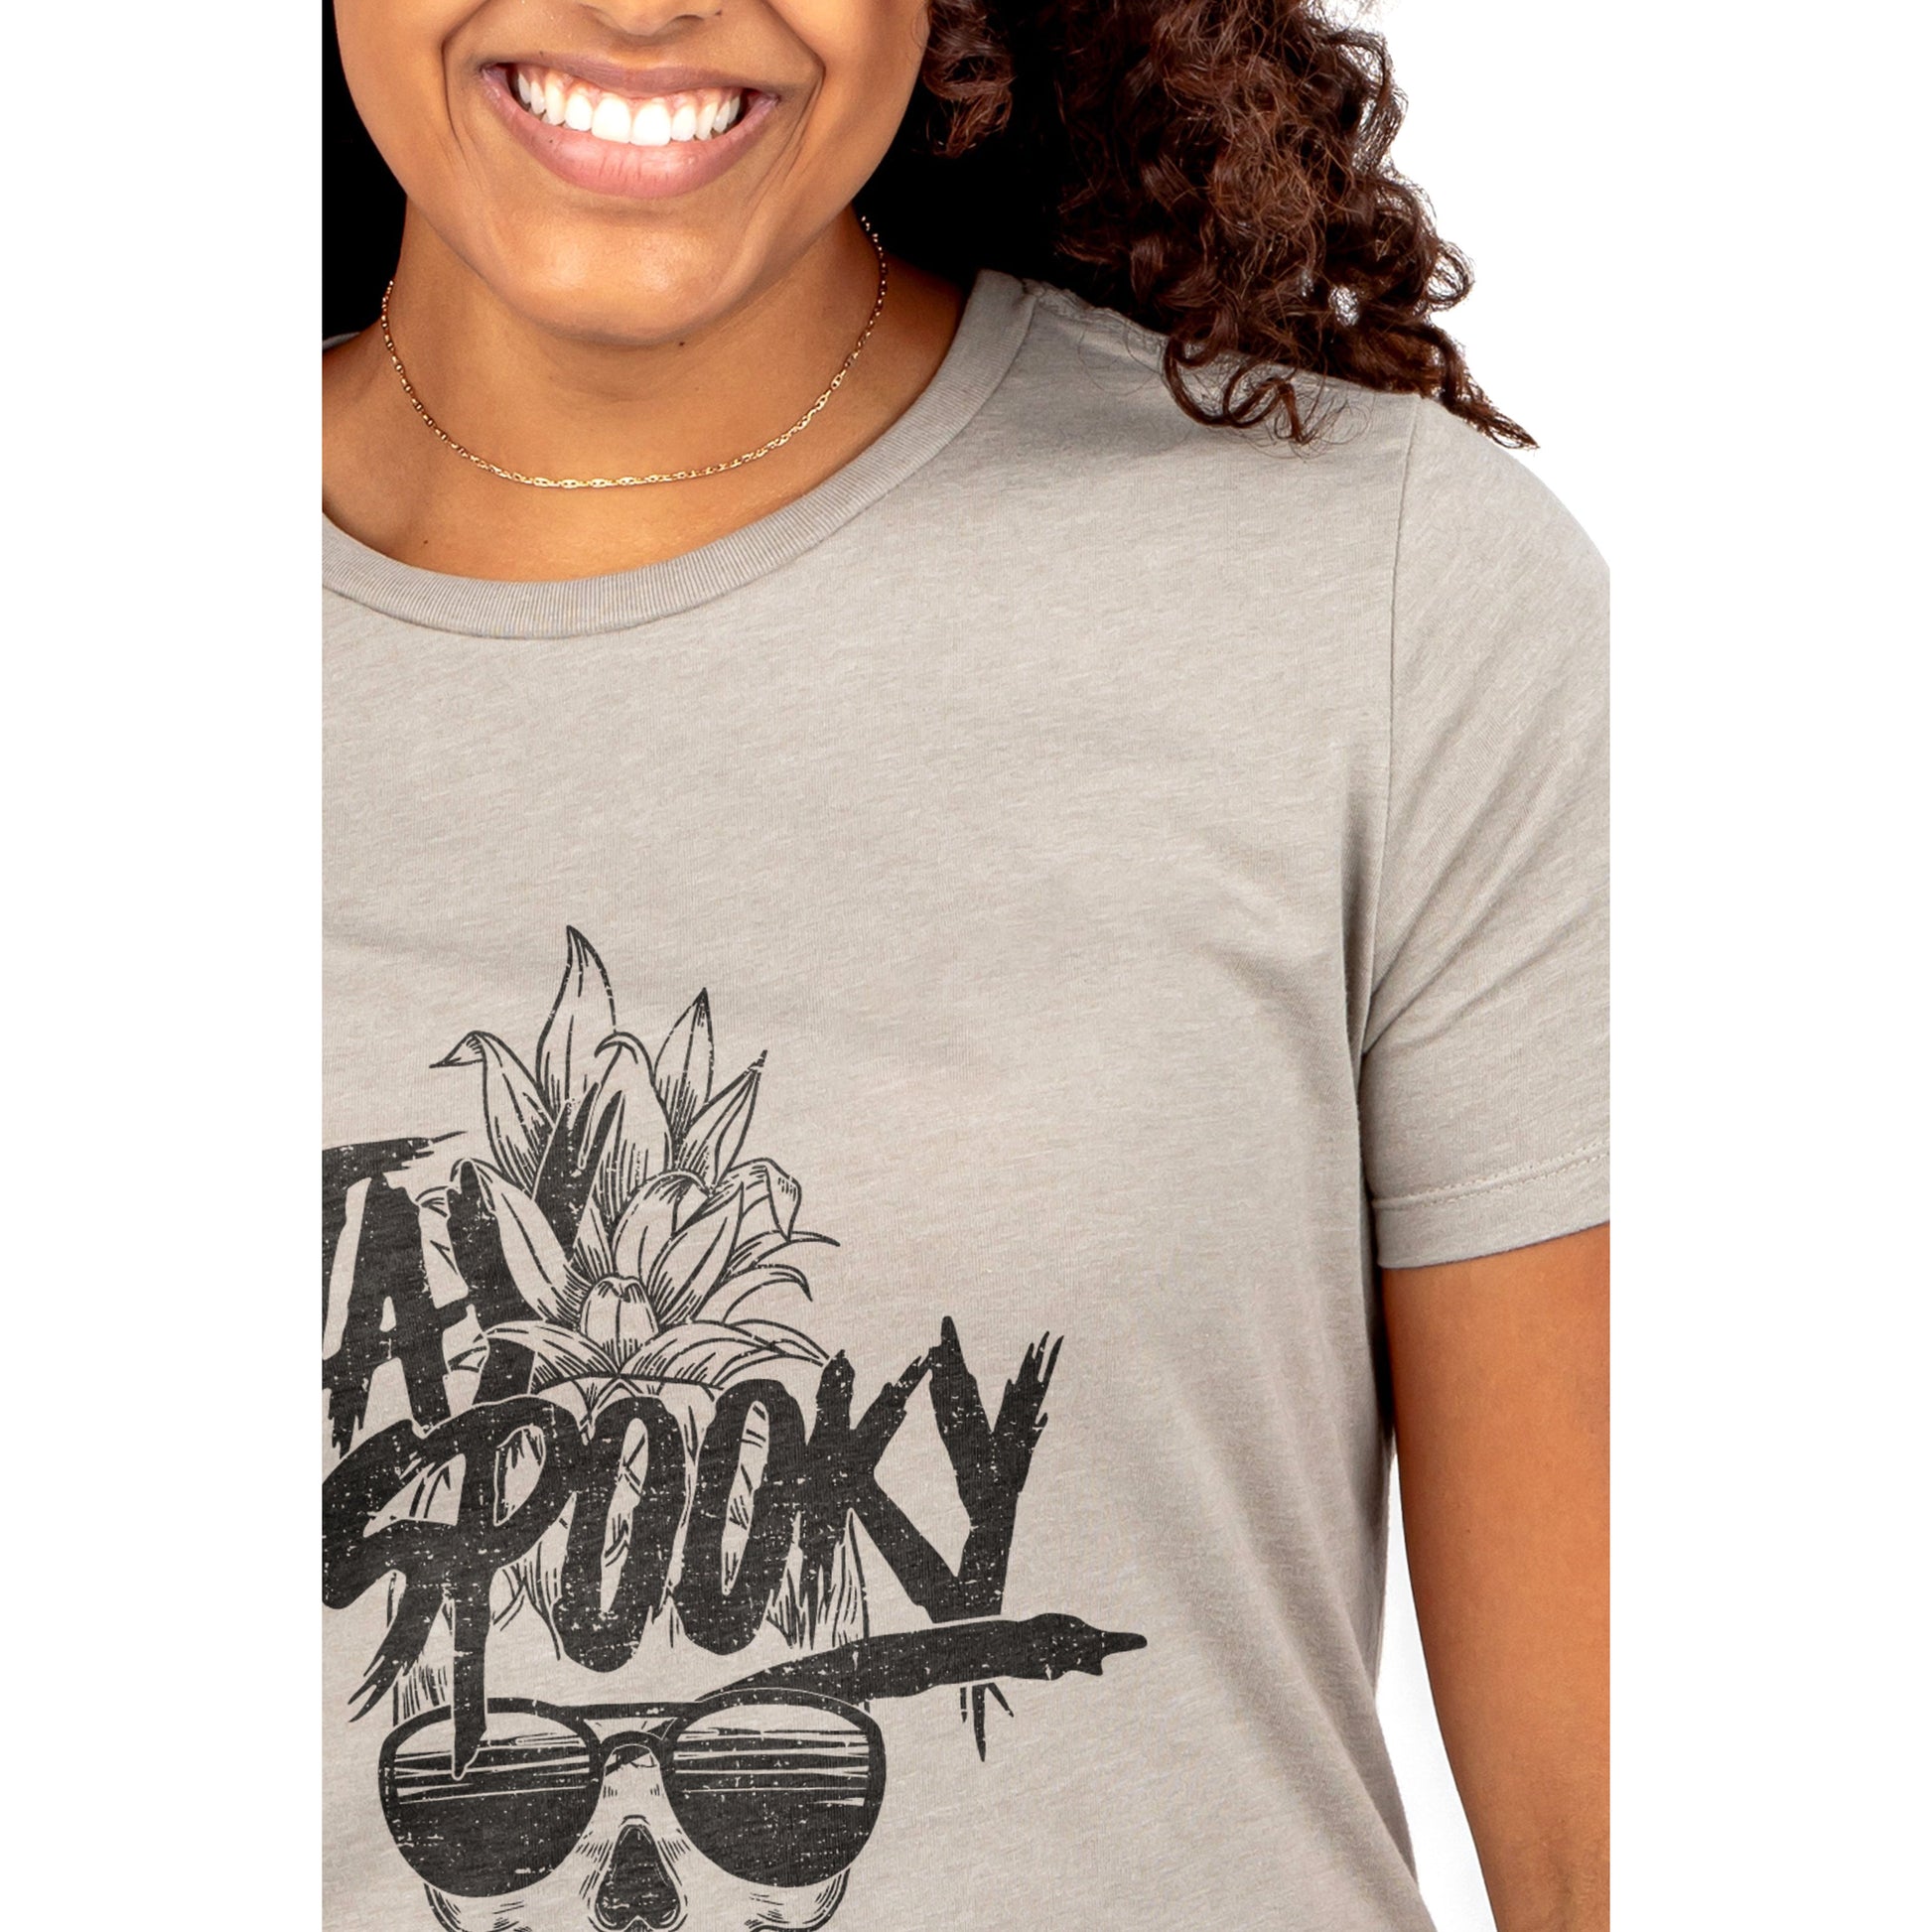 Stay Spooky - thread tank | Stories you can wear.